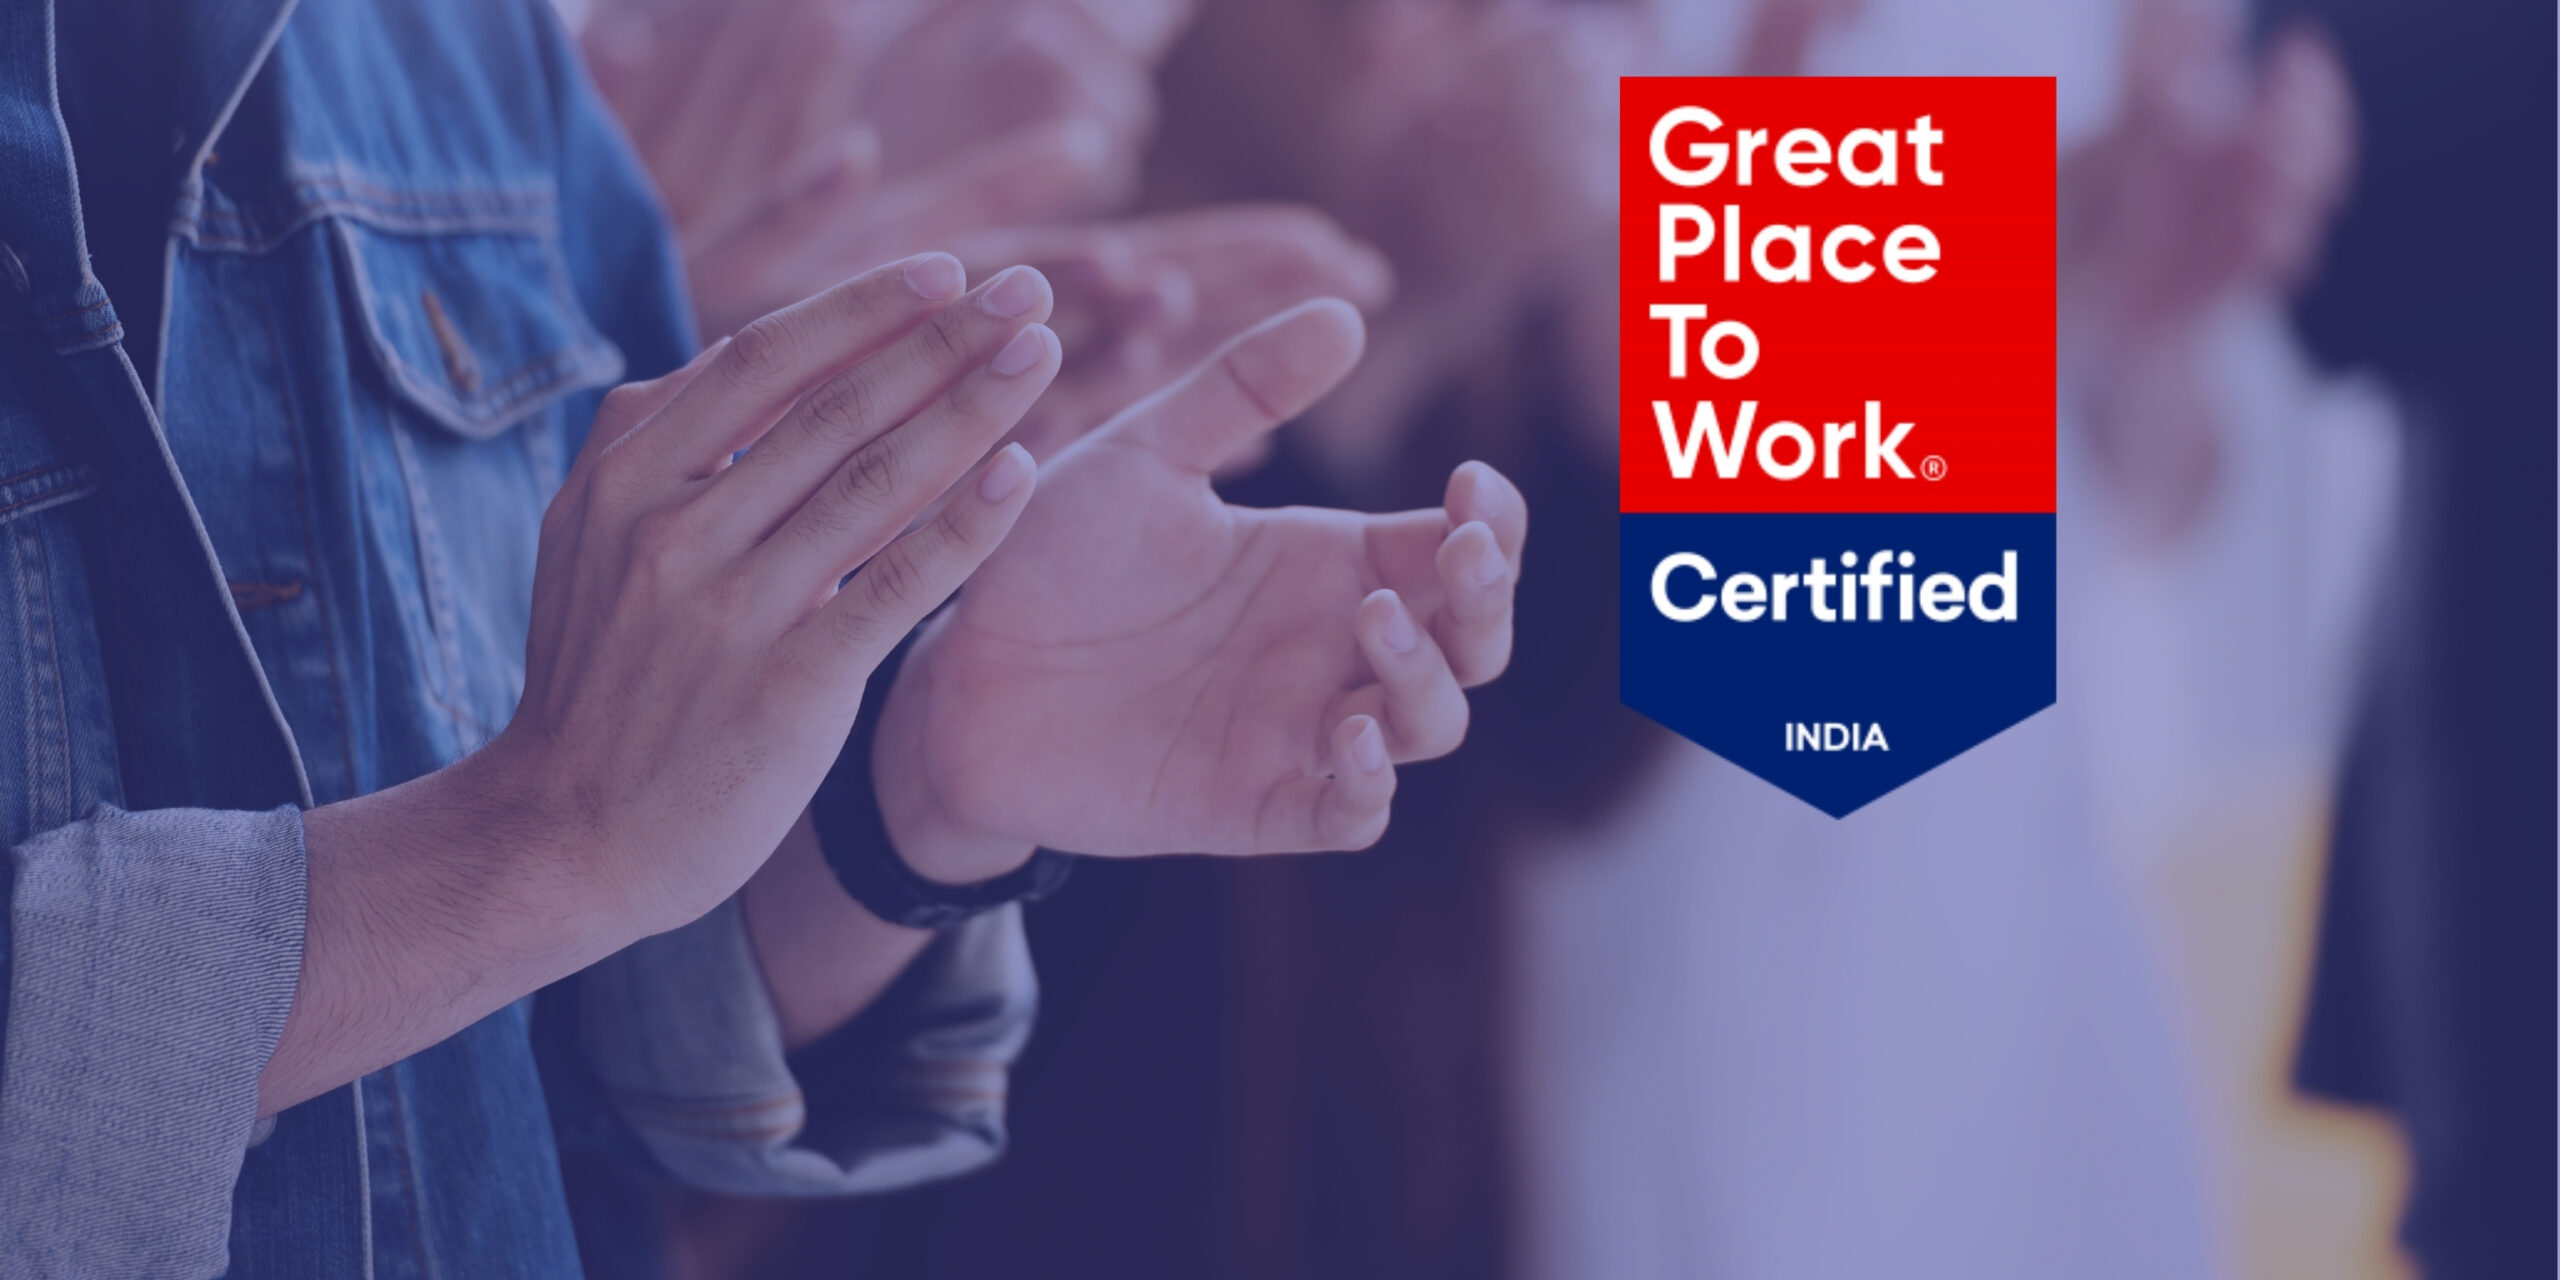 Great Place to WorkCertified in India for Fourth Year 3Pillar Global